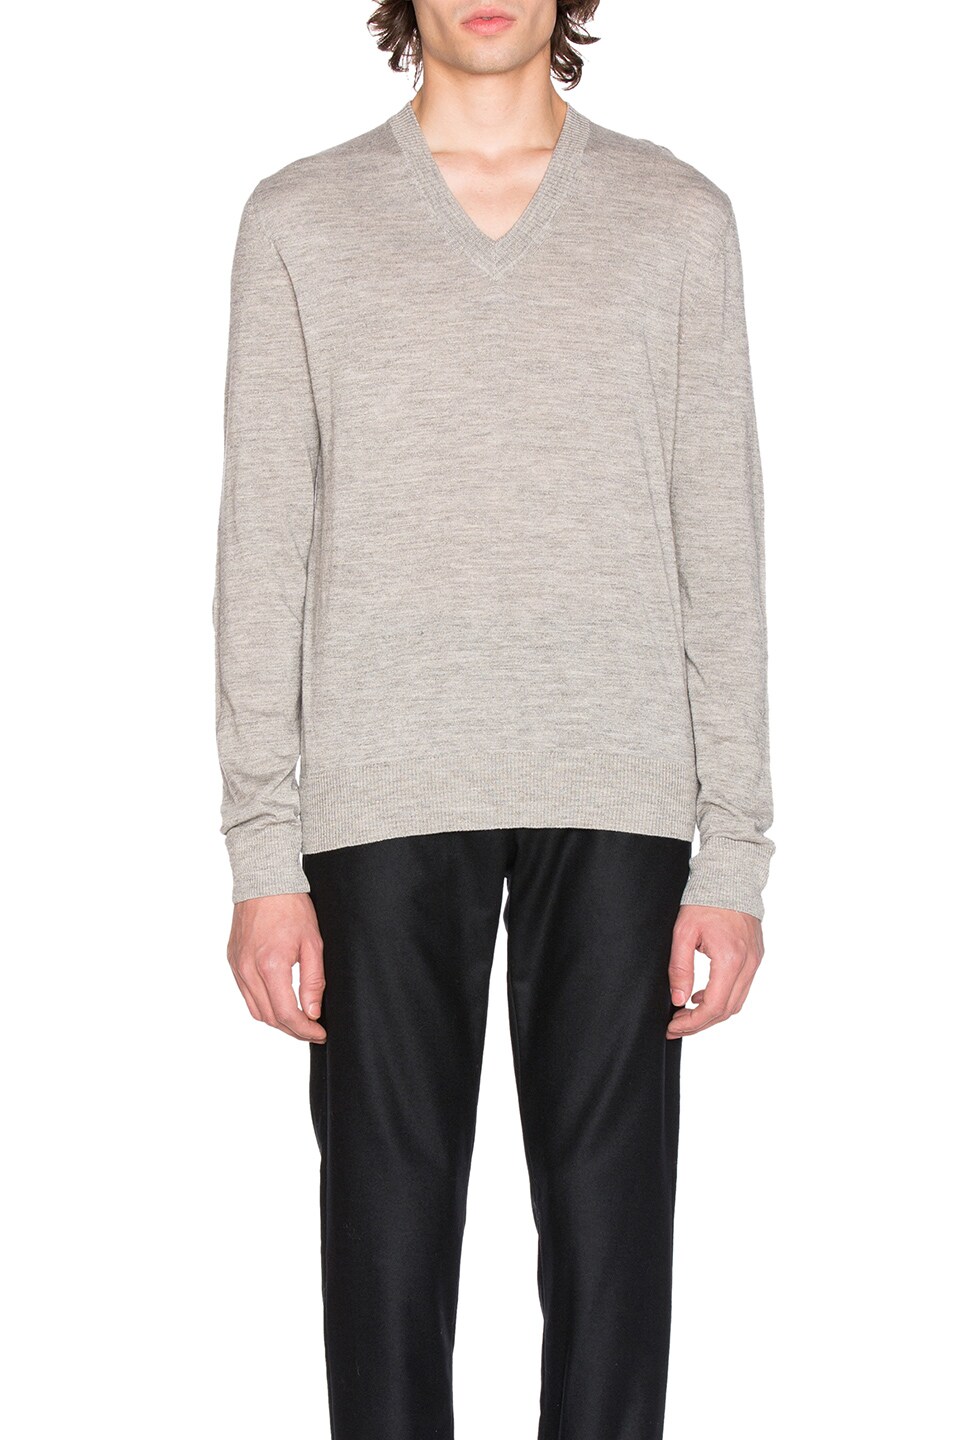 Image 1 of Maison Margiela Jersey V Neck Sweater with Elbow Patches in Light Grey Melange